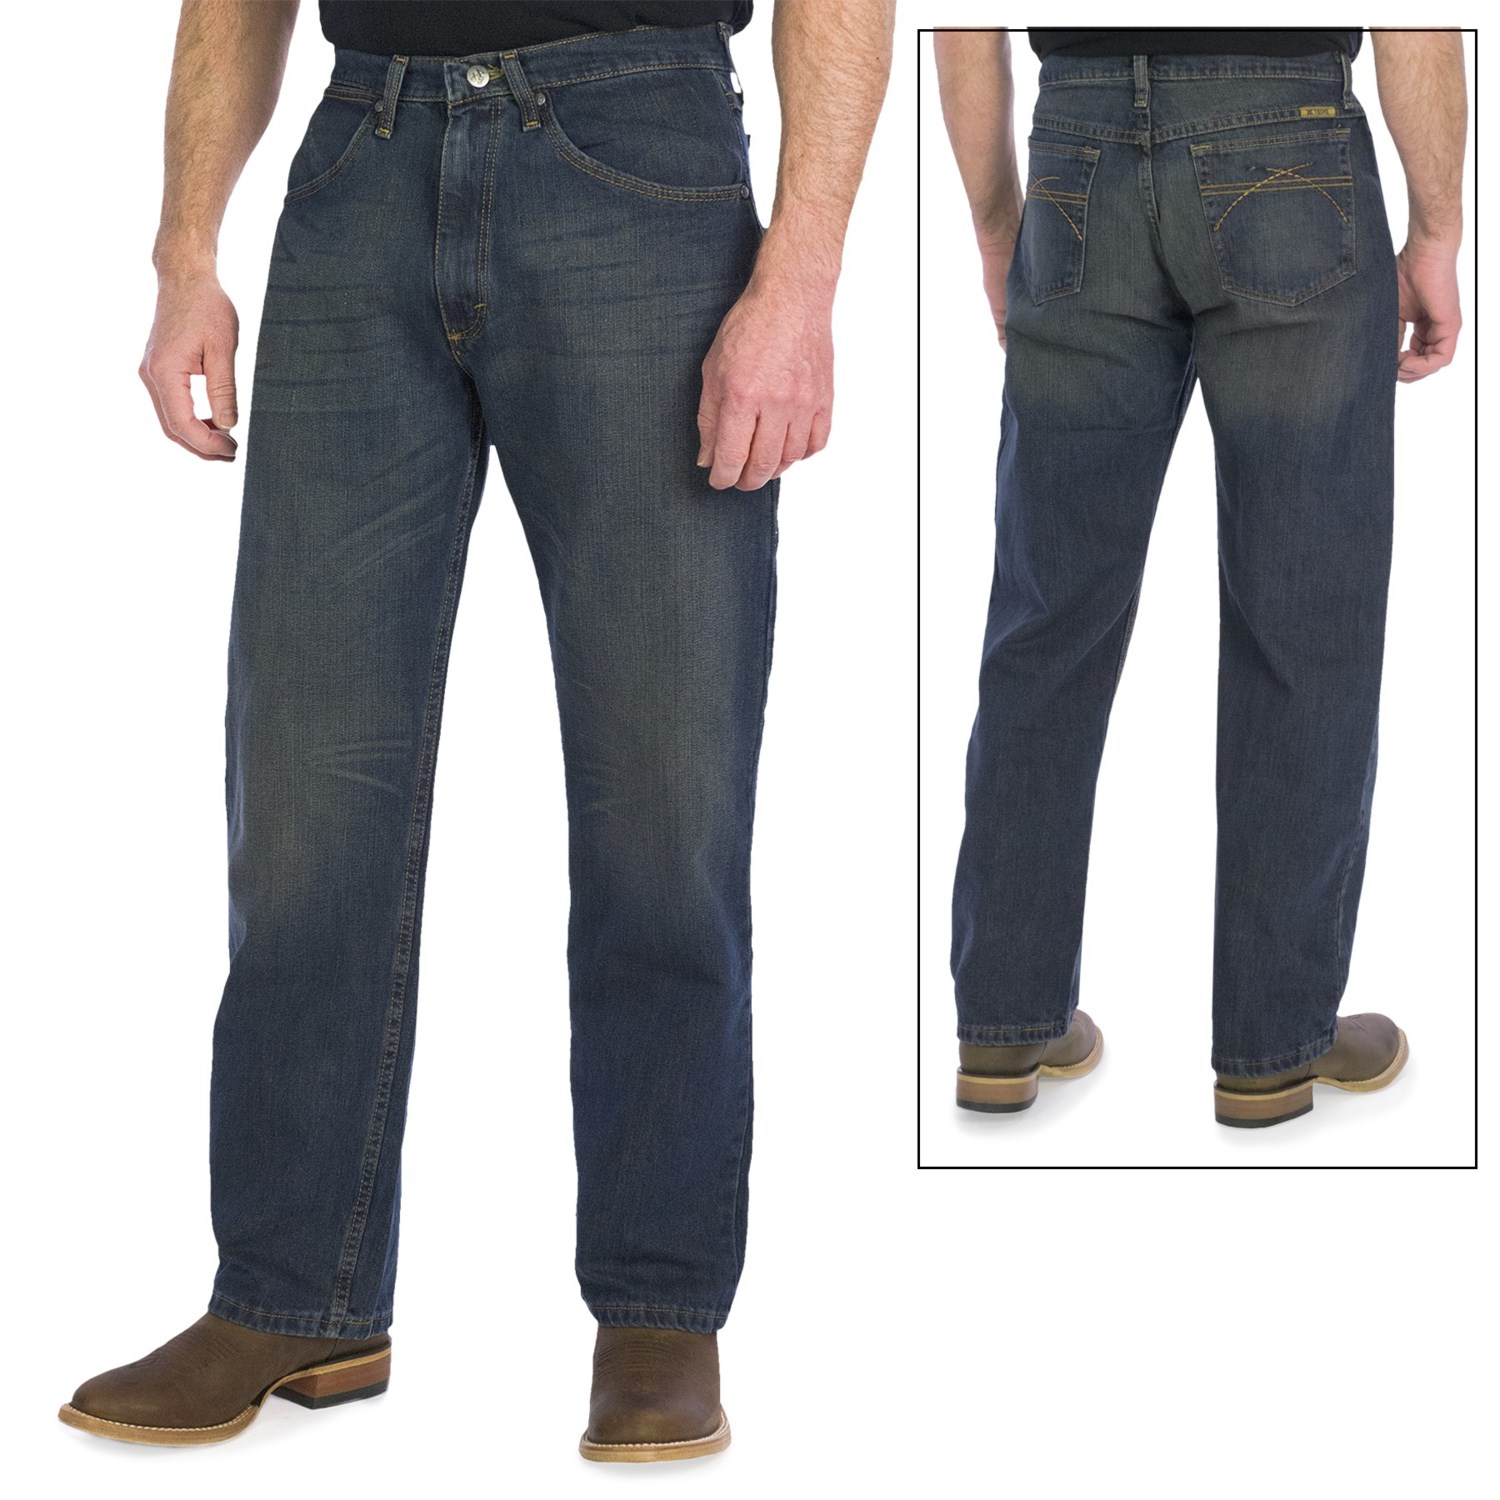 Wrangler Extreme Relaxed Jeans (For Men) - Save 71%